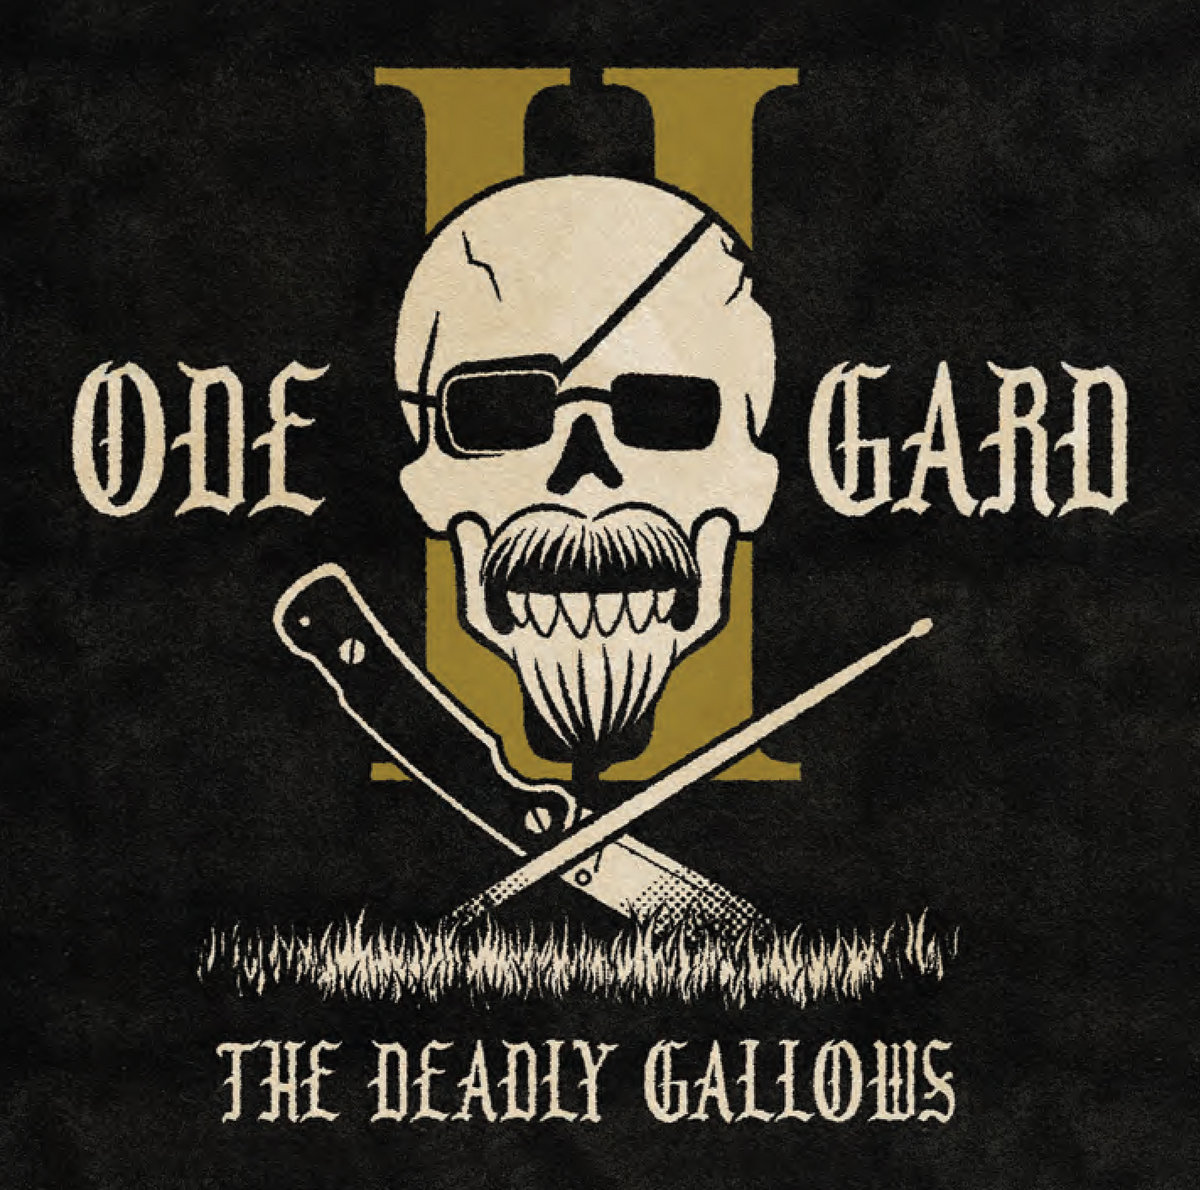 Dying Scene Album Review: The Deadly Gallows – “Ode II Gard”